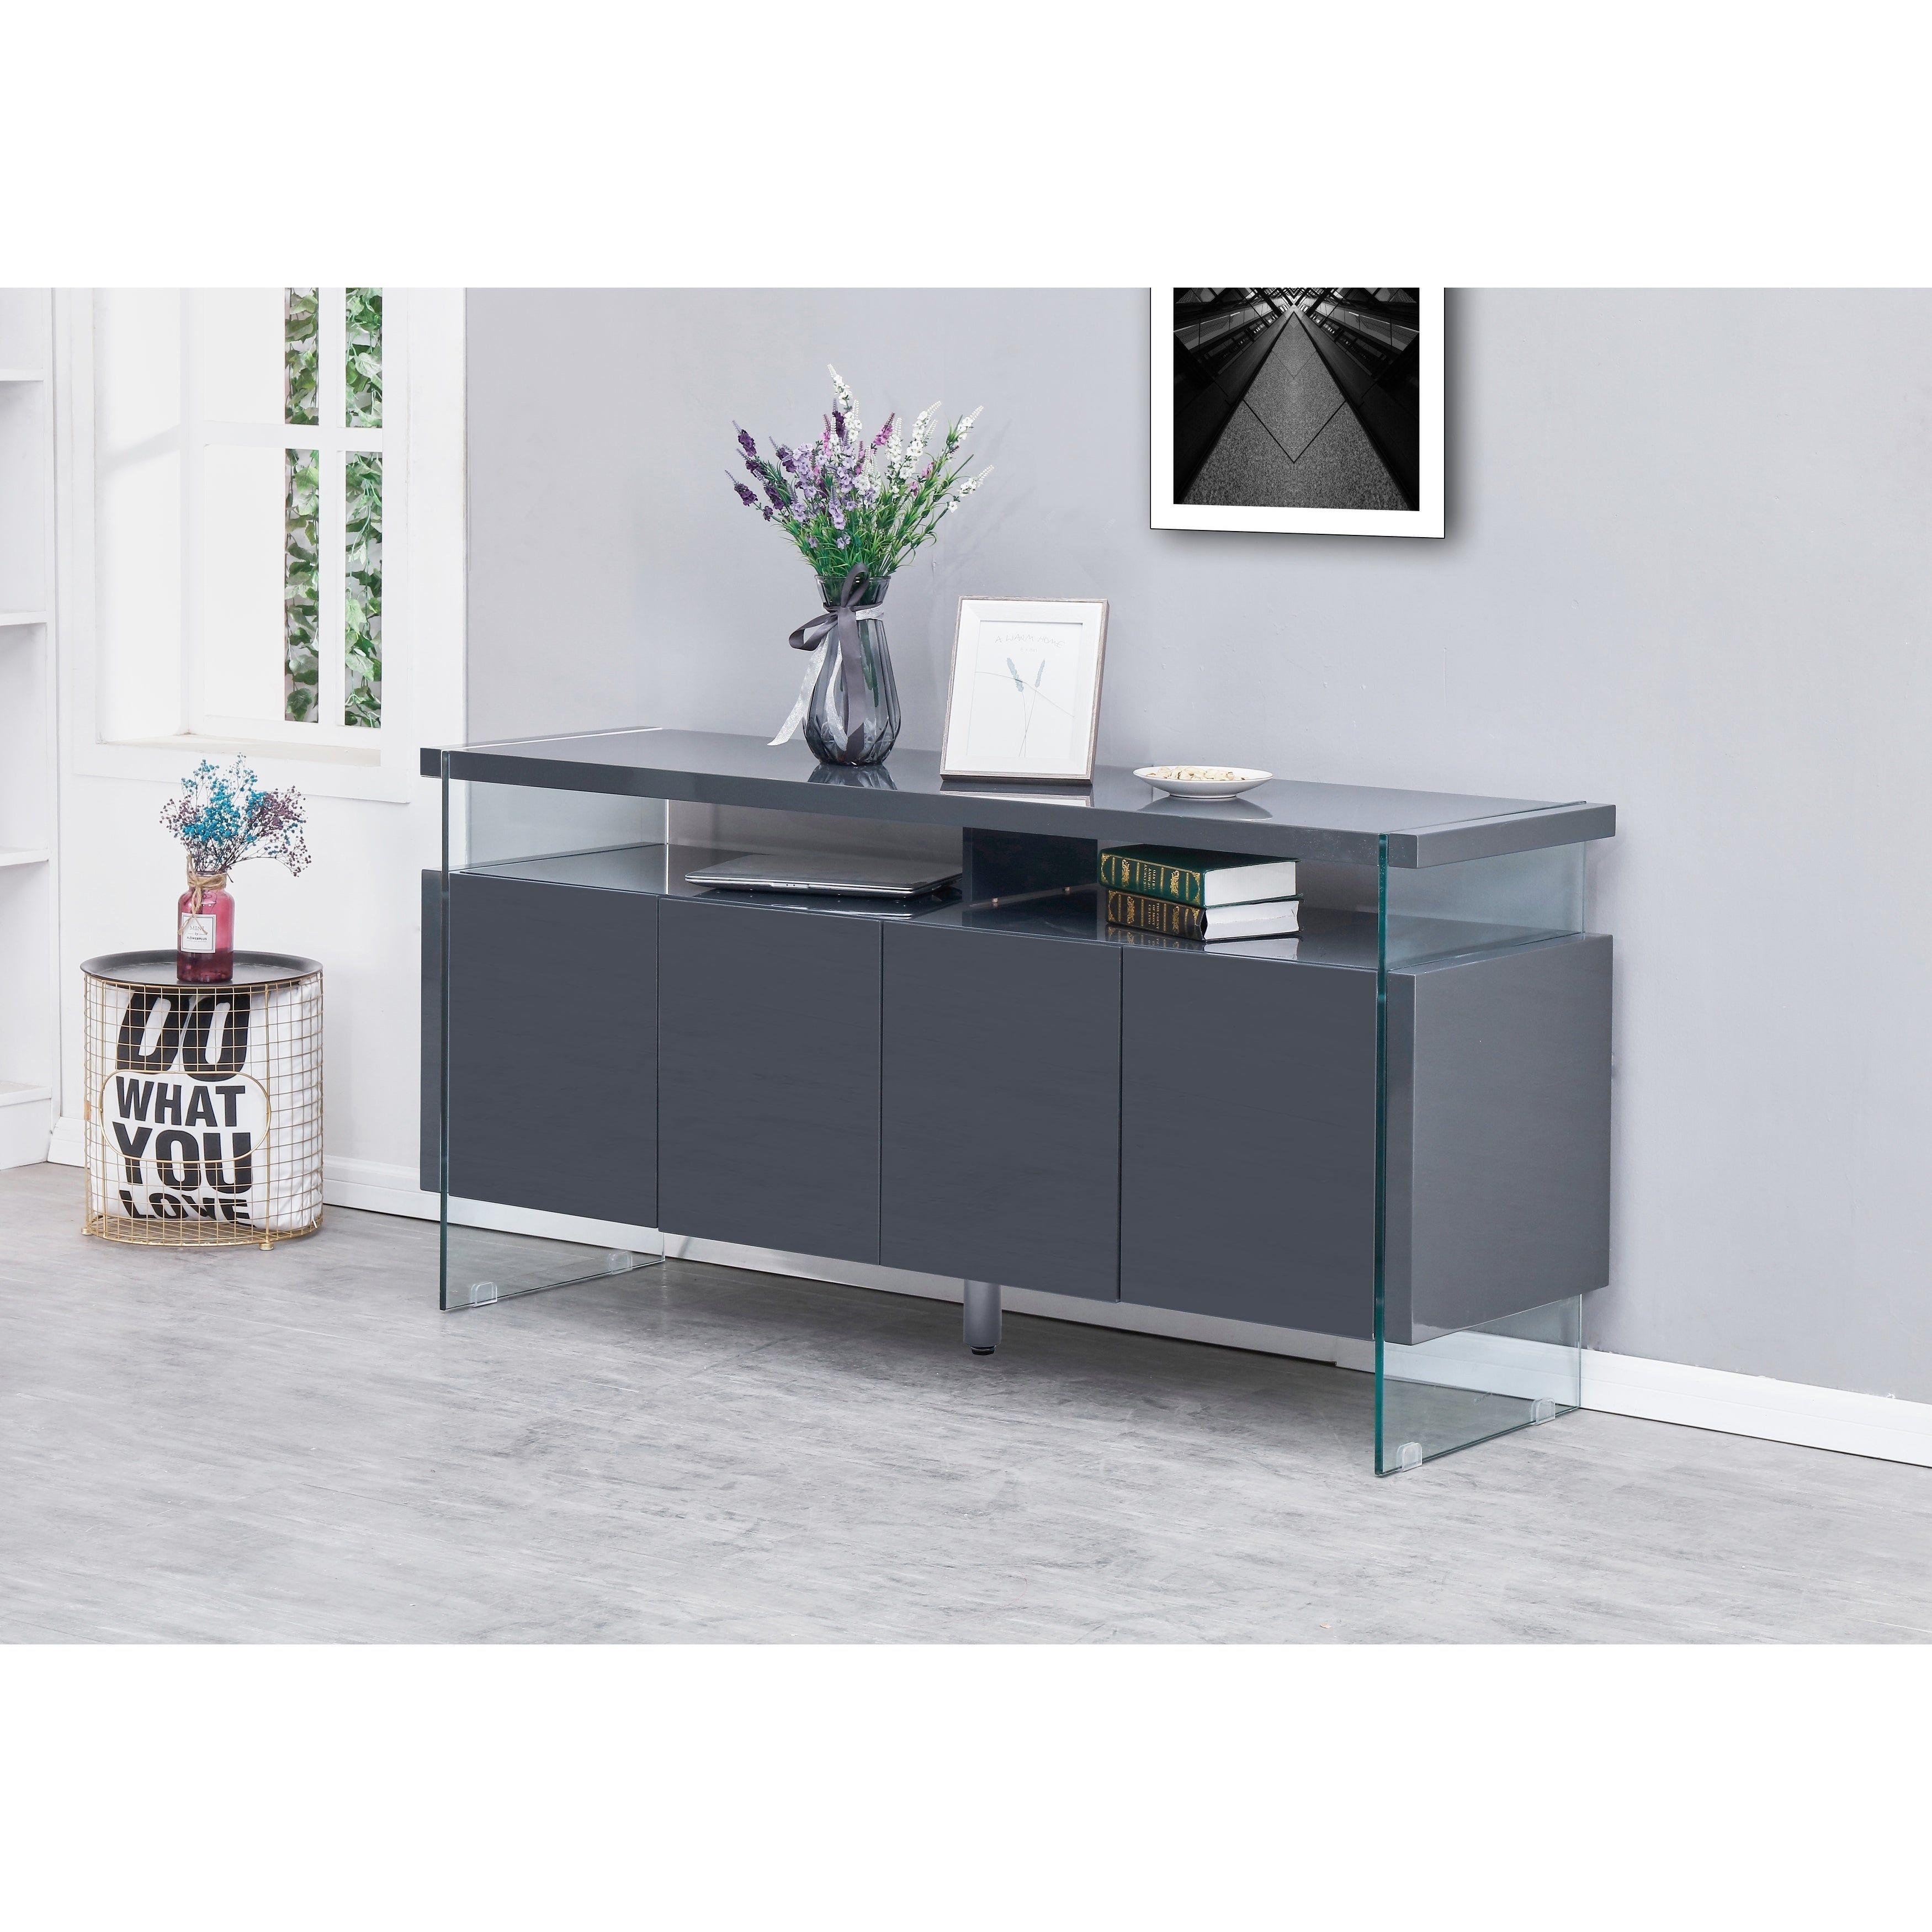 Best Quality Furniture 4 Door Lacquer Buffet Server Inside Modern Lacquer 2 Door 3 Drawer Buffets (View 7 of 30)